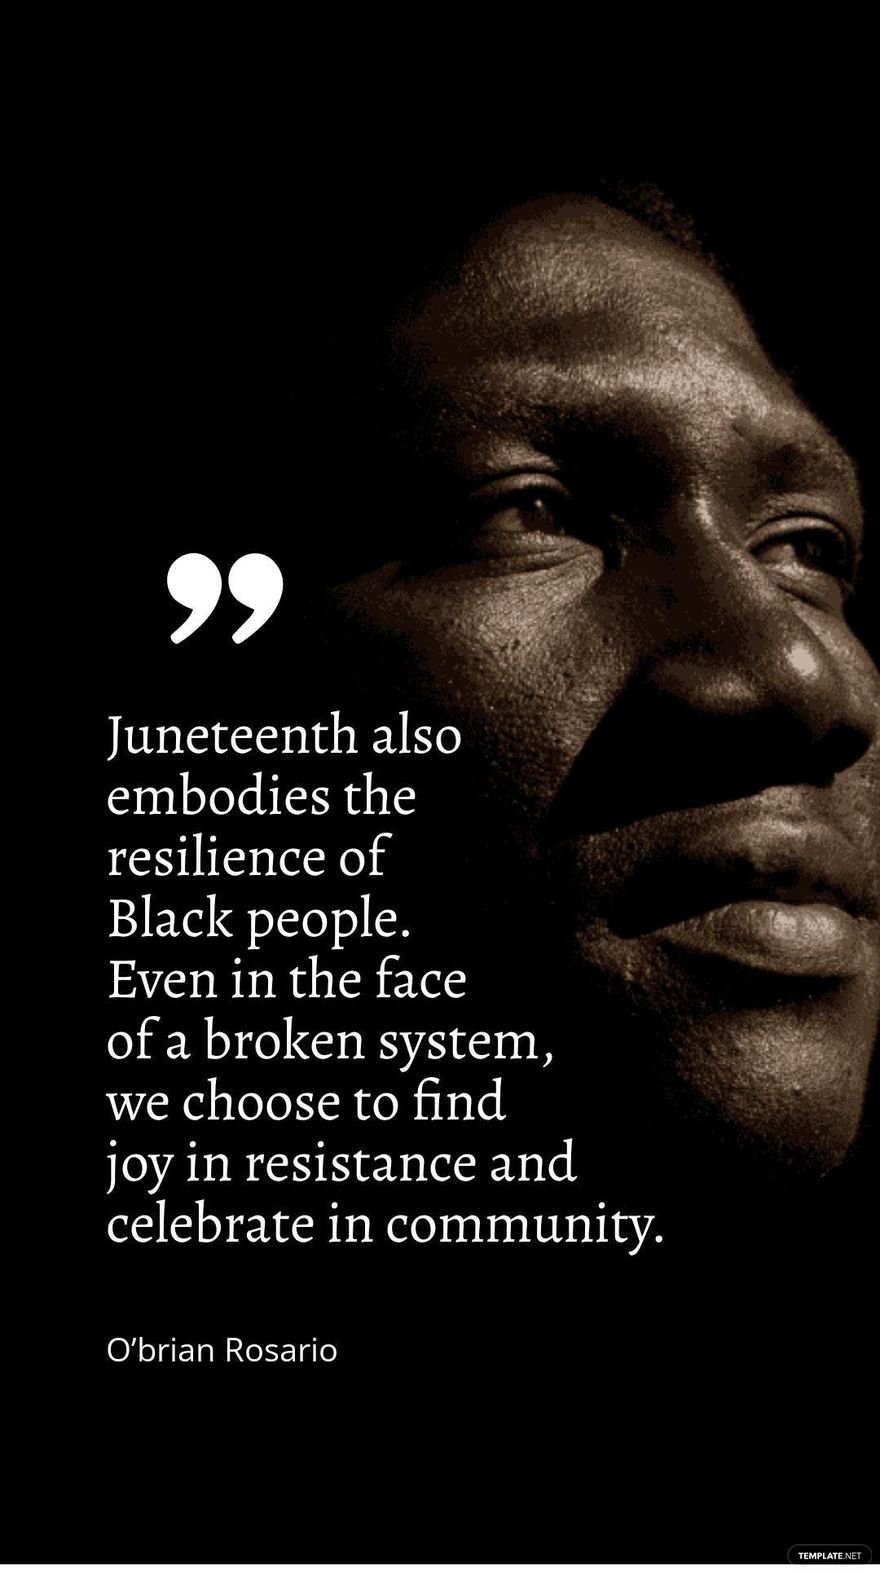 O’brian Rosario - Juneteenth also embodies the resilience of Black people. Even in the face of a broken system, we choose to find joy in resistance and celebrate in community. in JPG